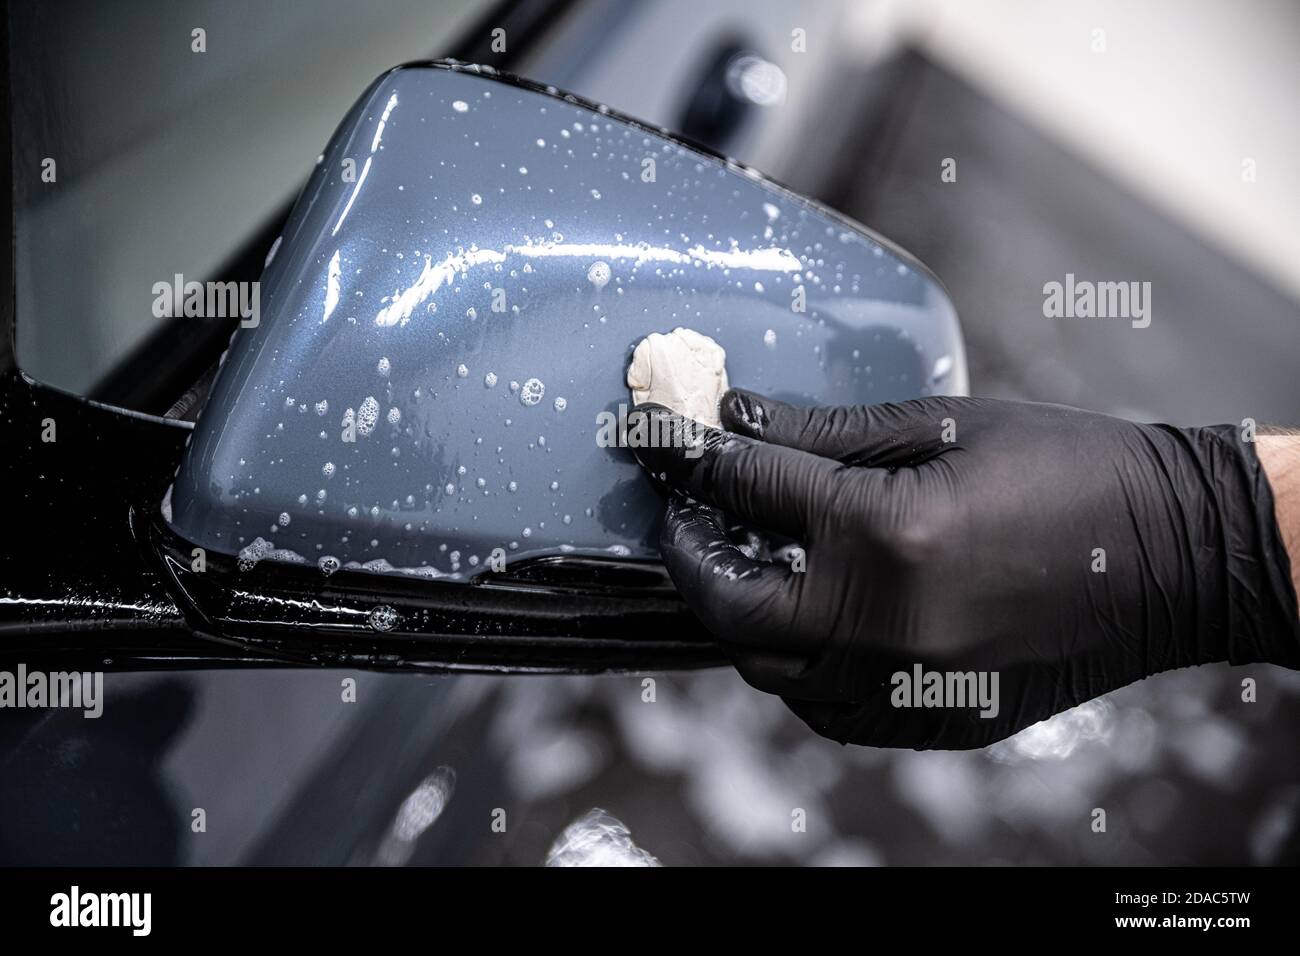 Man car wash worker cleaning car varnish with car clay. Stock Photo